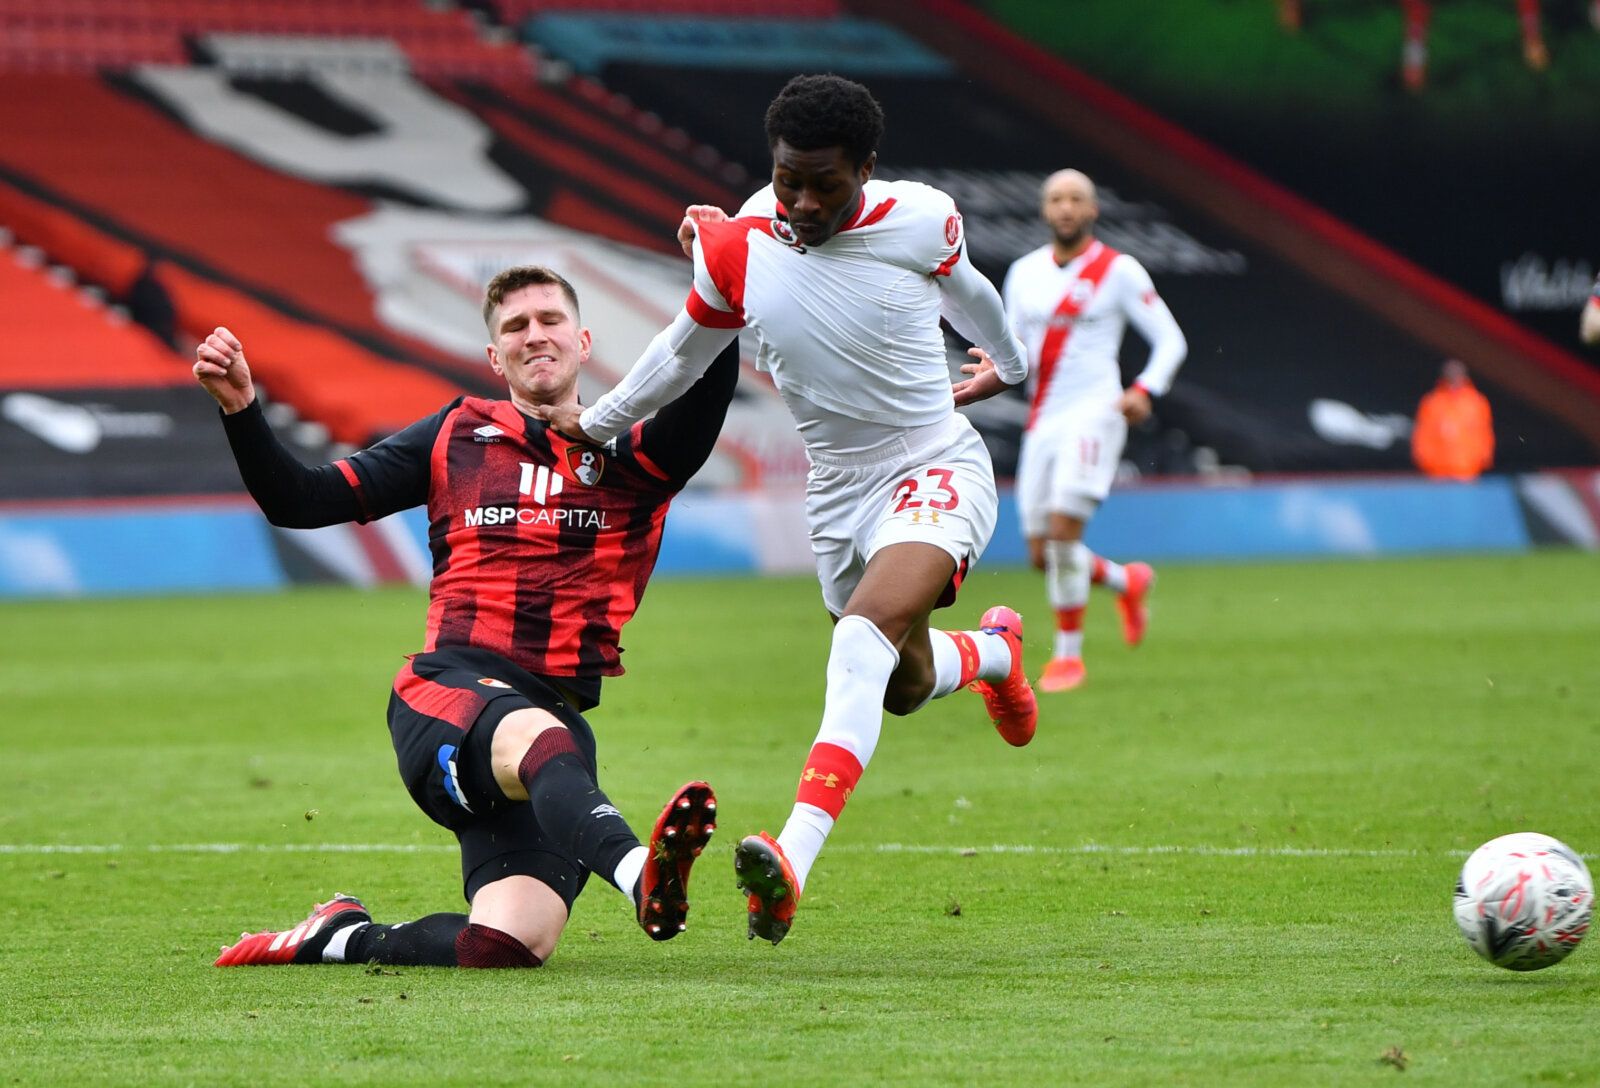 Soccer Football - FA Cup Quarter Final - AFC Bournemouth v Southampton - Vitality Stadium, Bournemouth, Britain - March 20, 2021 Southampton's Nathan Tella in action with AFC Bournemouth's Chris Mepham REUTERS/Dylan Martinez